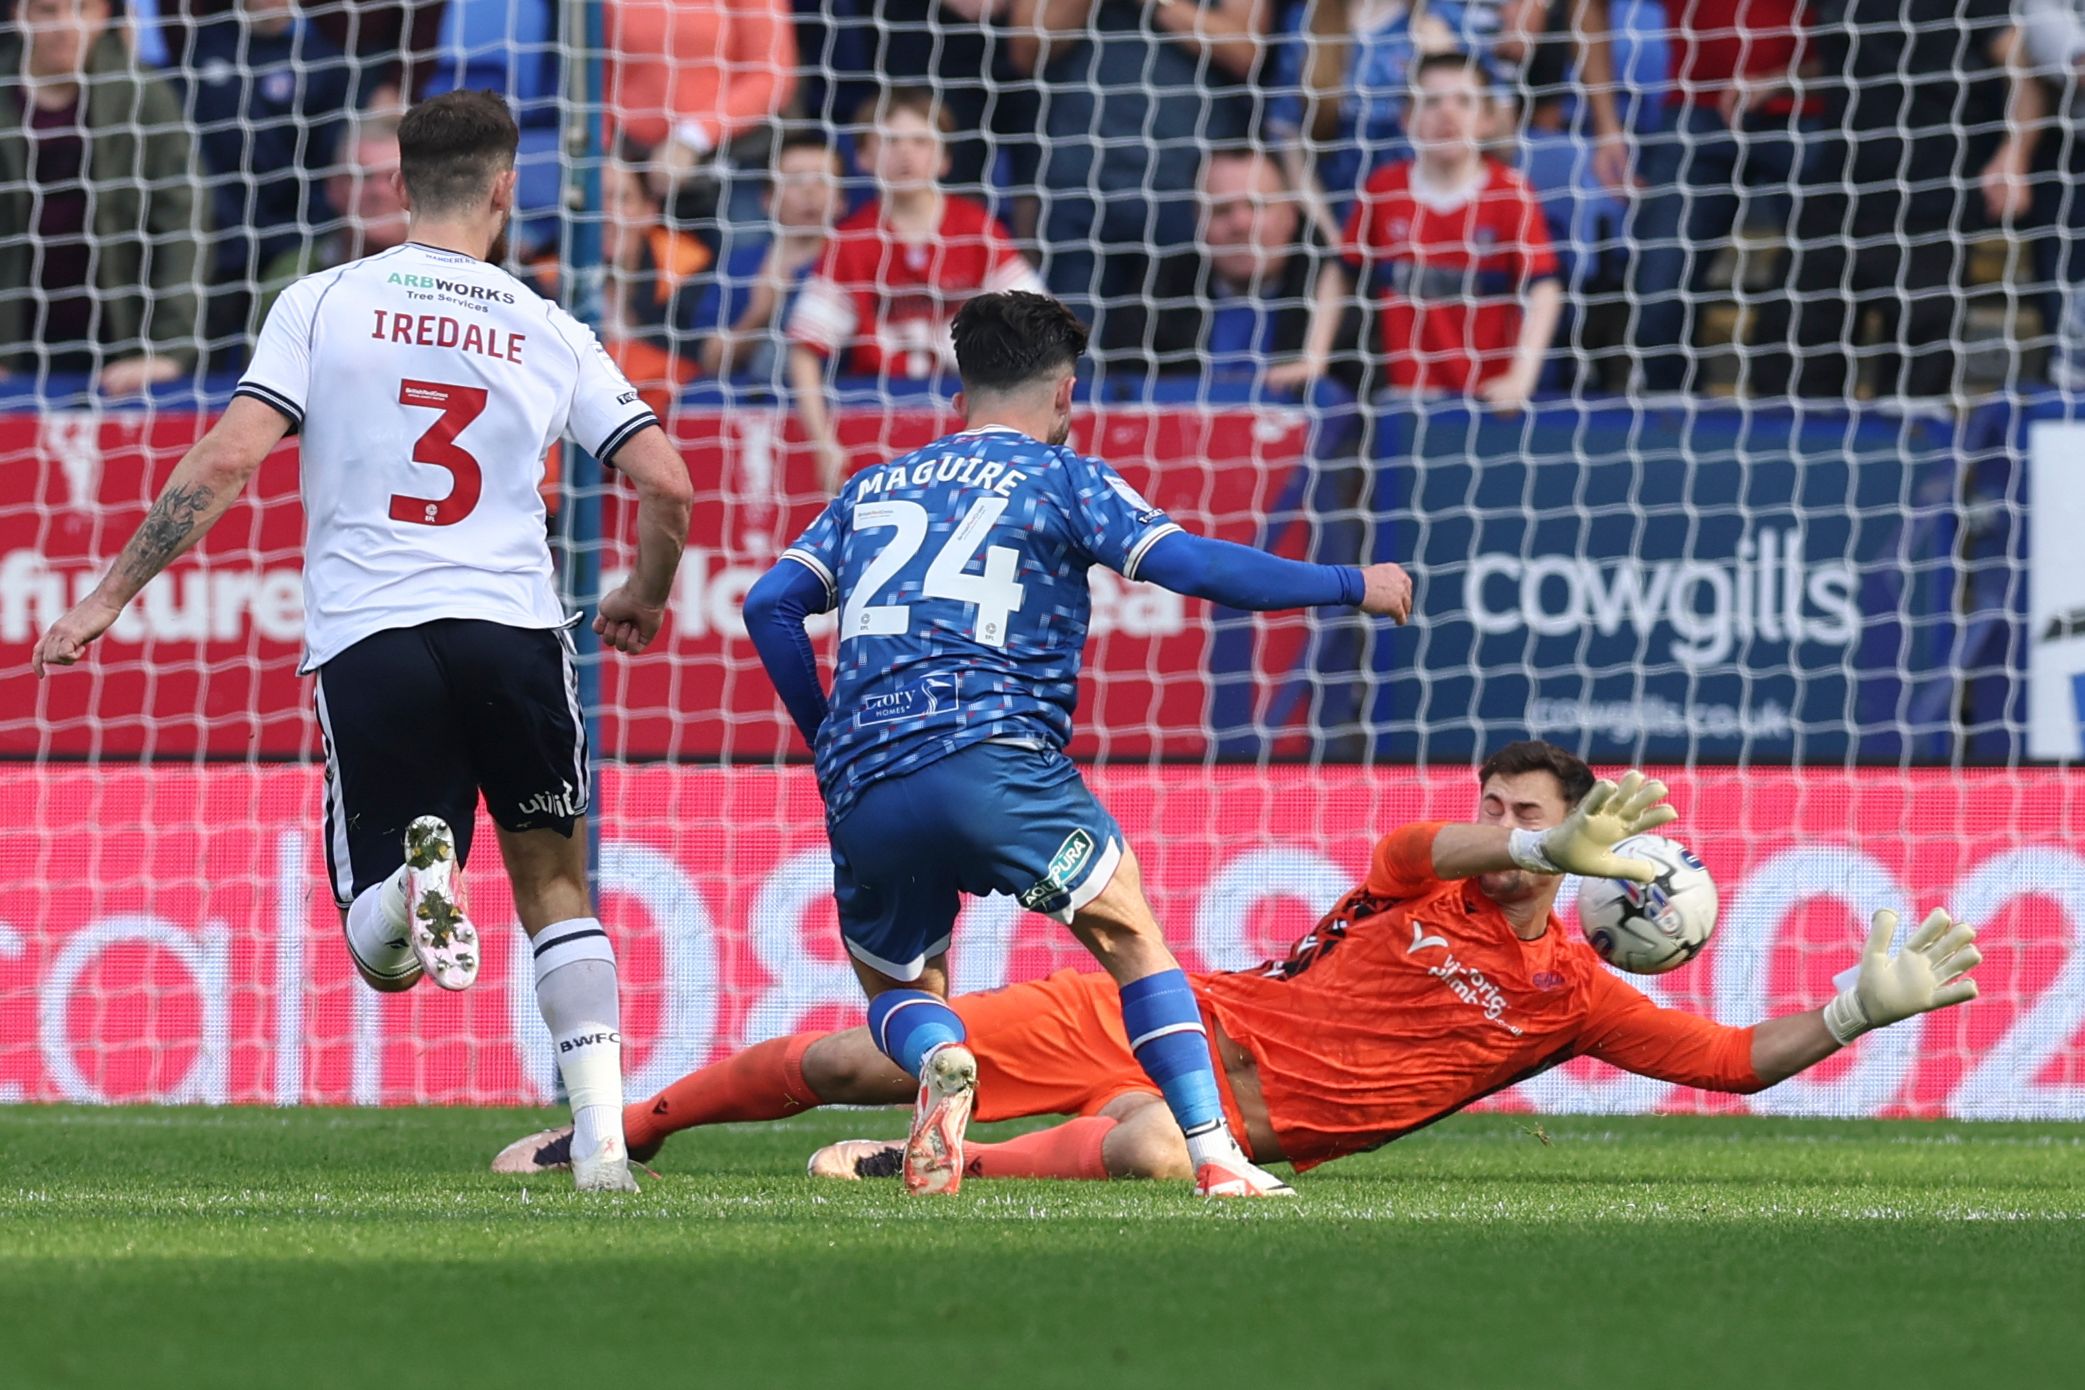 Baxter save Maguire